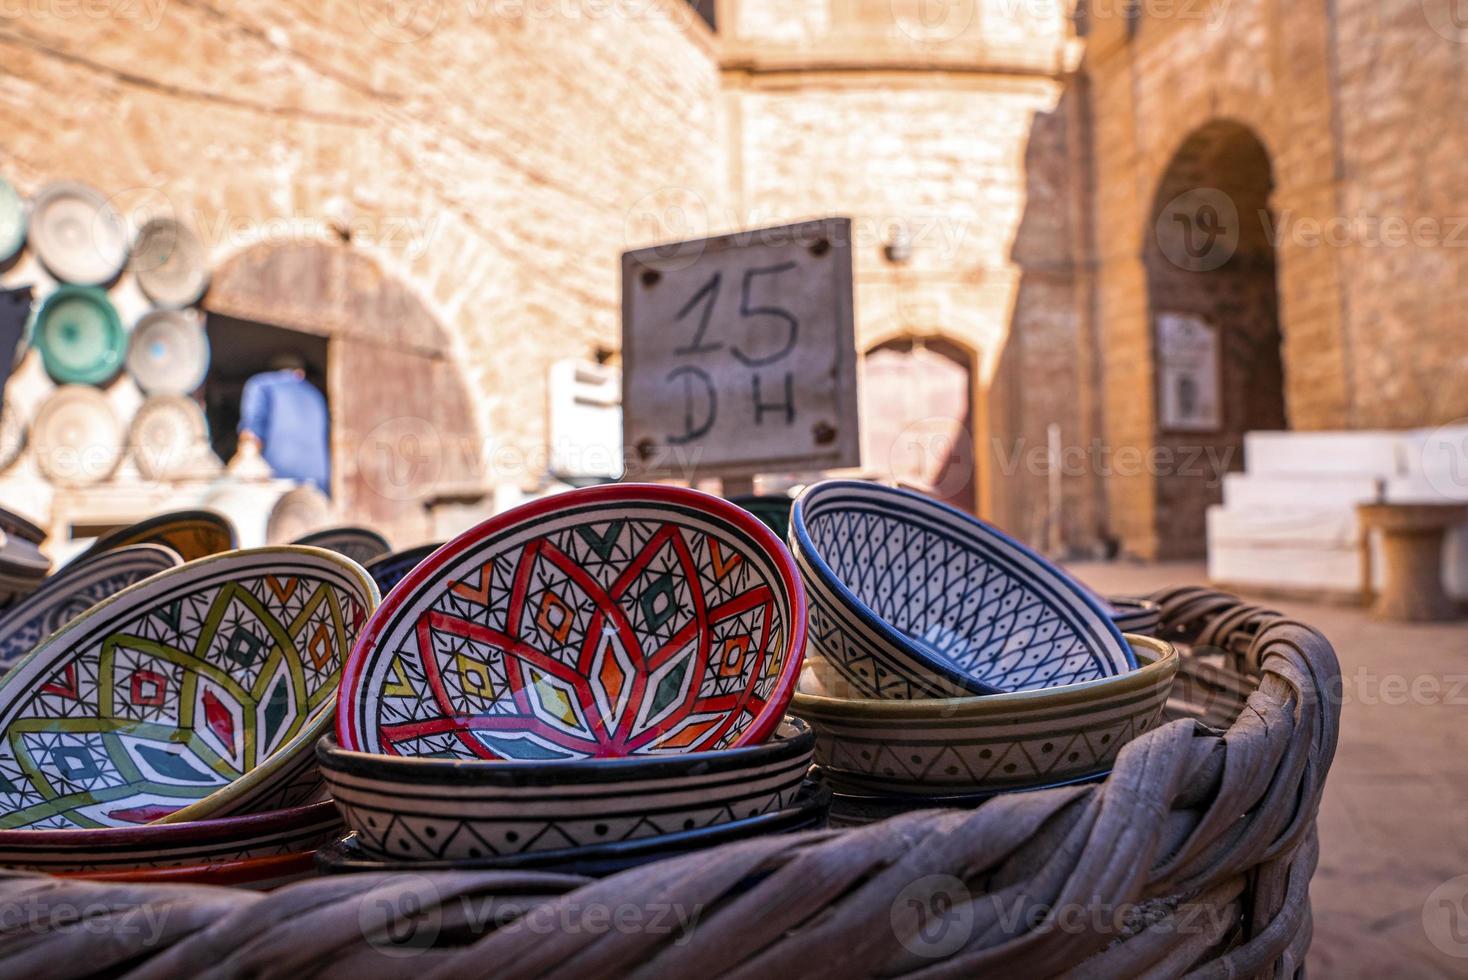 Handmade colorful decorated bowls on display for sale in market photo